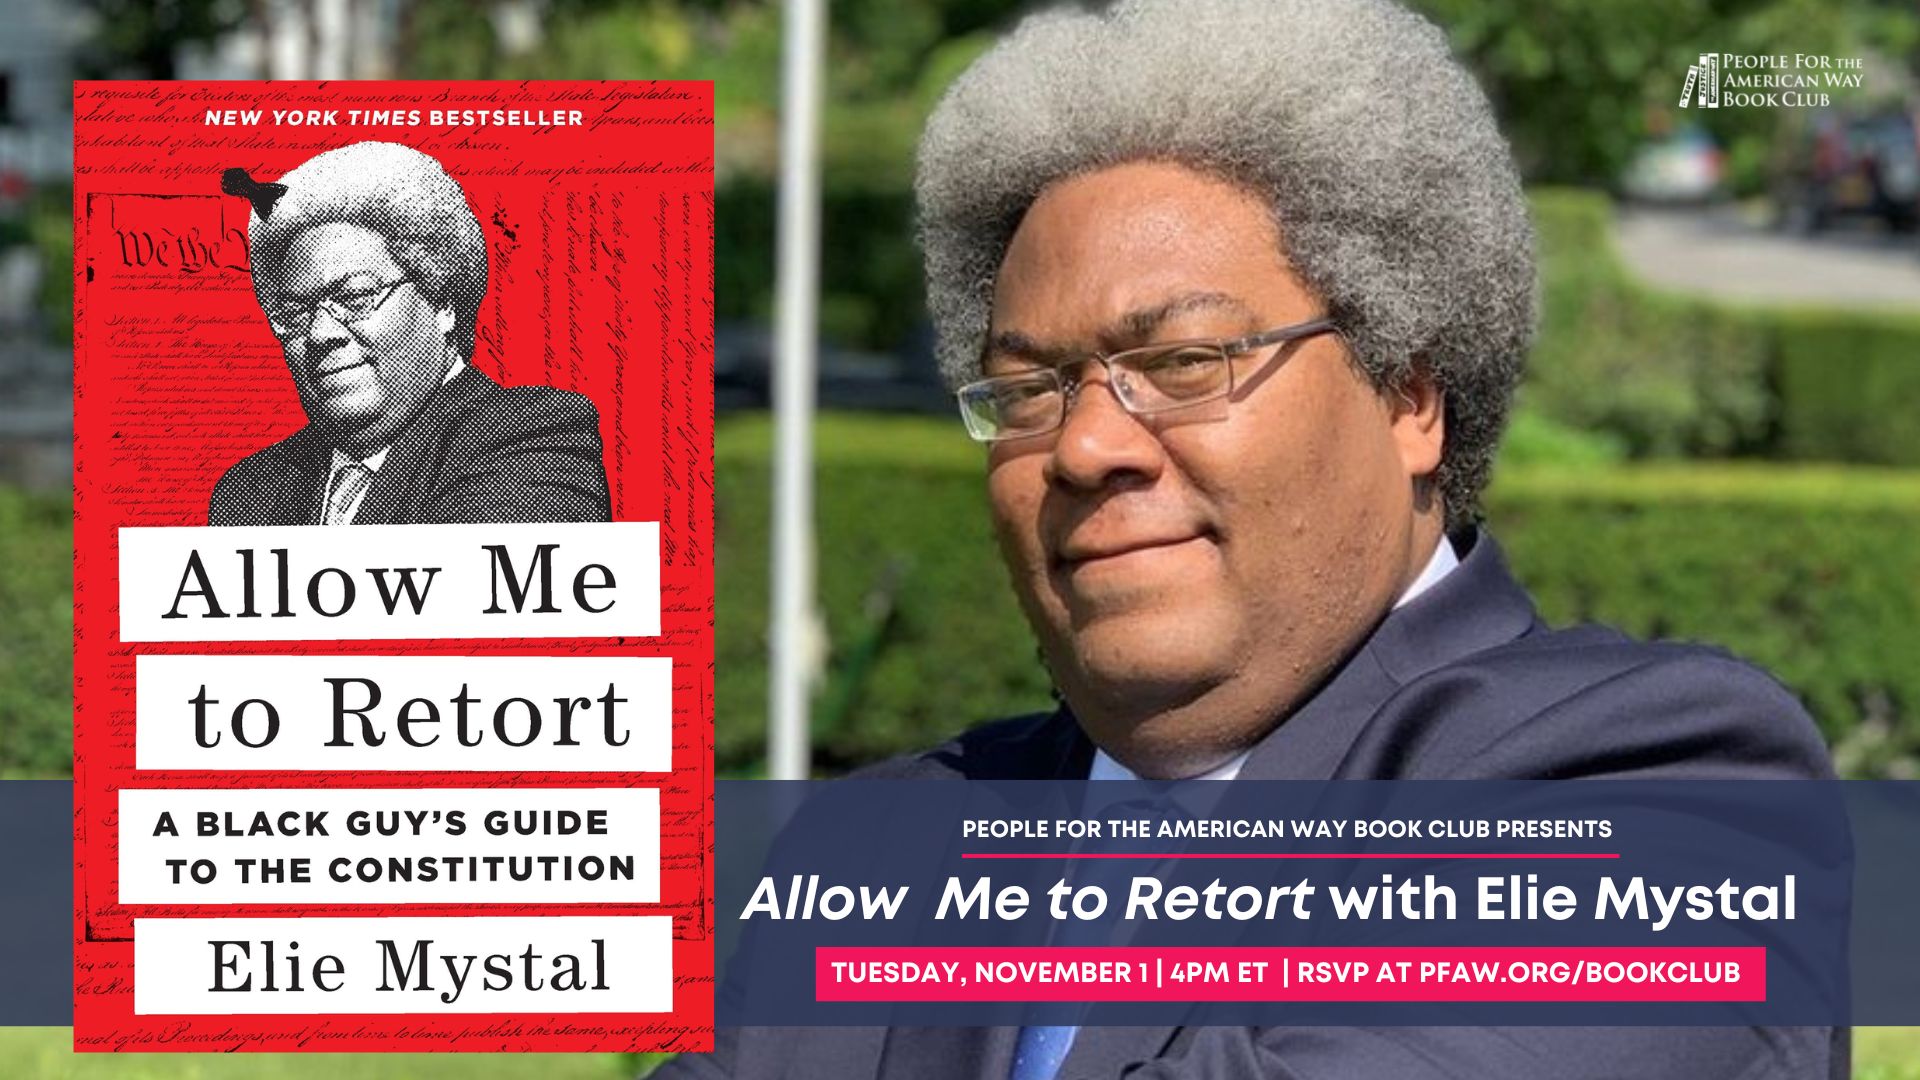 Image of Elie Mystal on right. On left, picture of the book cover of "Allow Me to Retort: A Black Guy's Guide to the Constitution." Text on the photo reads People For the American Way Book Club Presents "Allow Me to Retort" with Elie Mystal Thursday November 1 4pm ET pfaw.org/bookclub